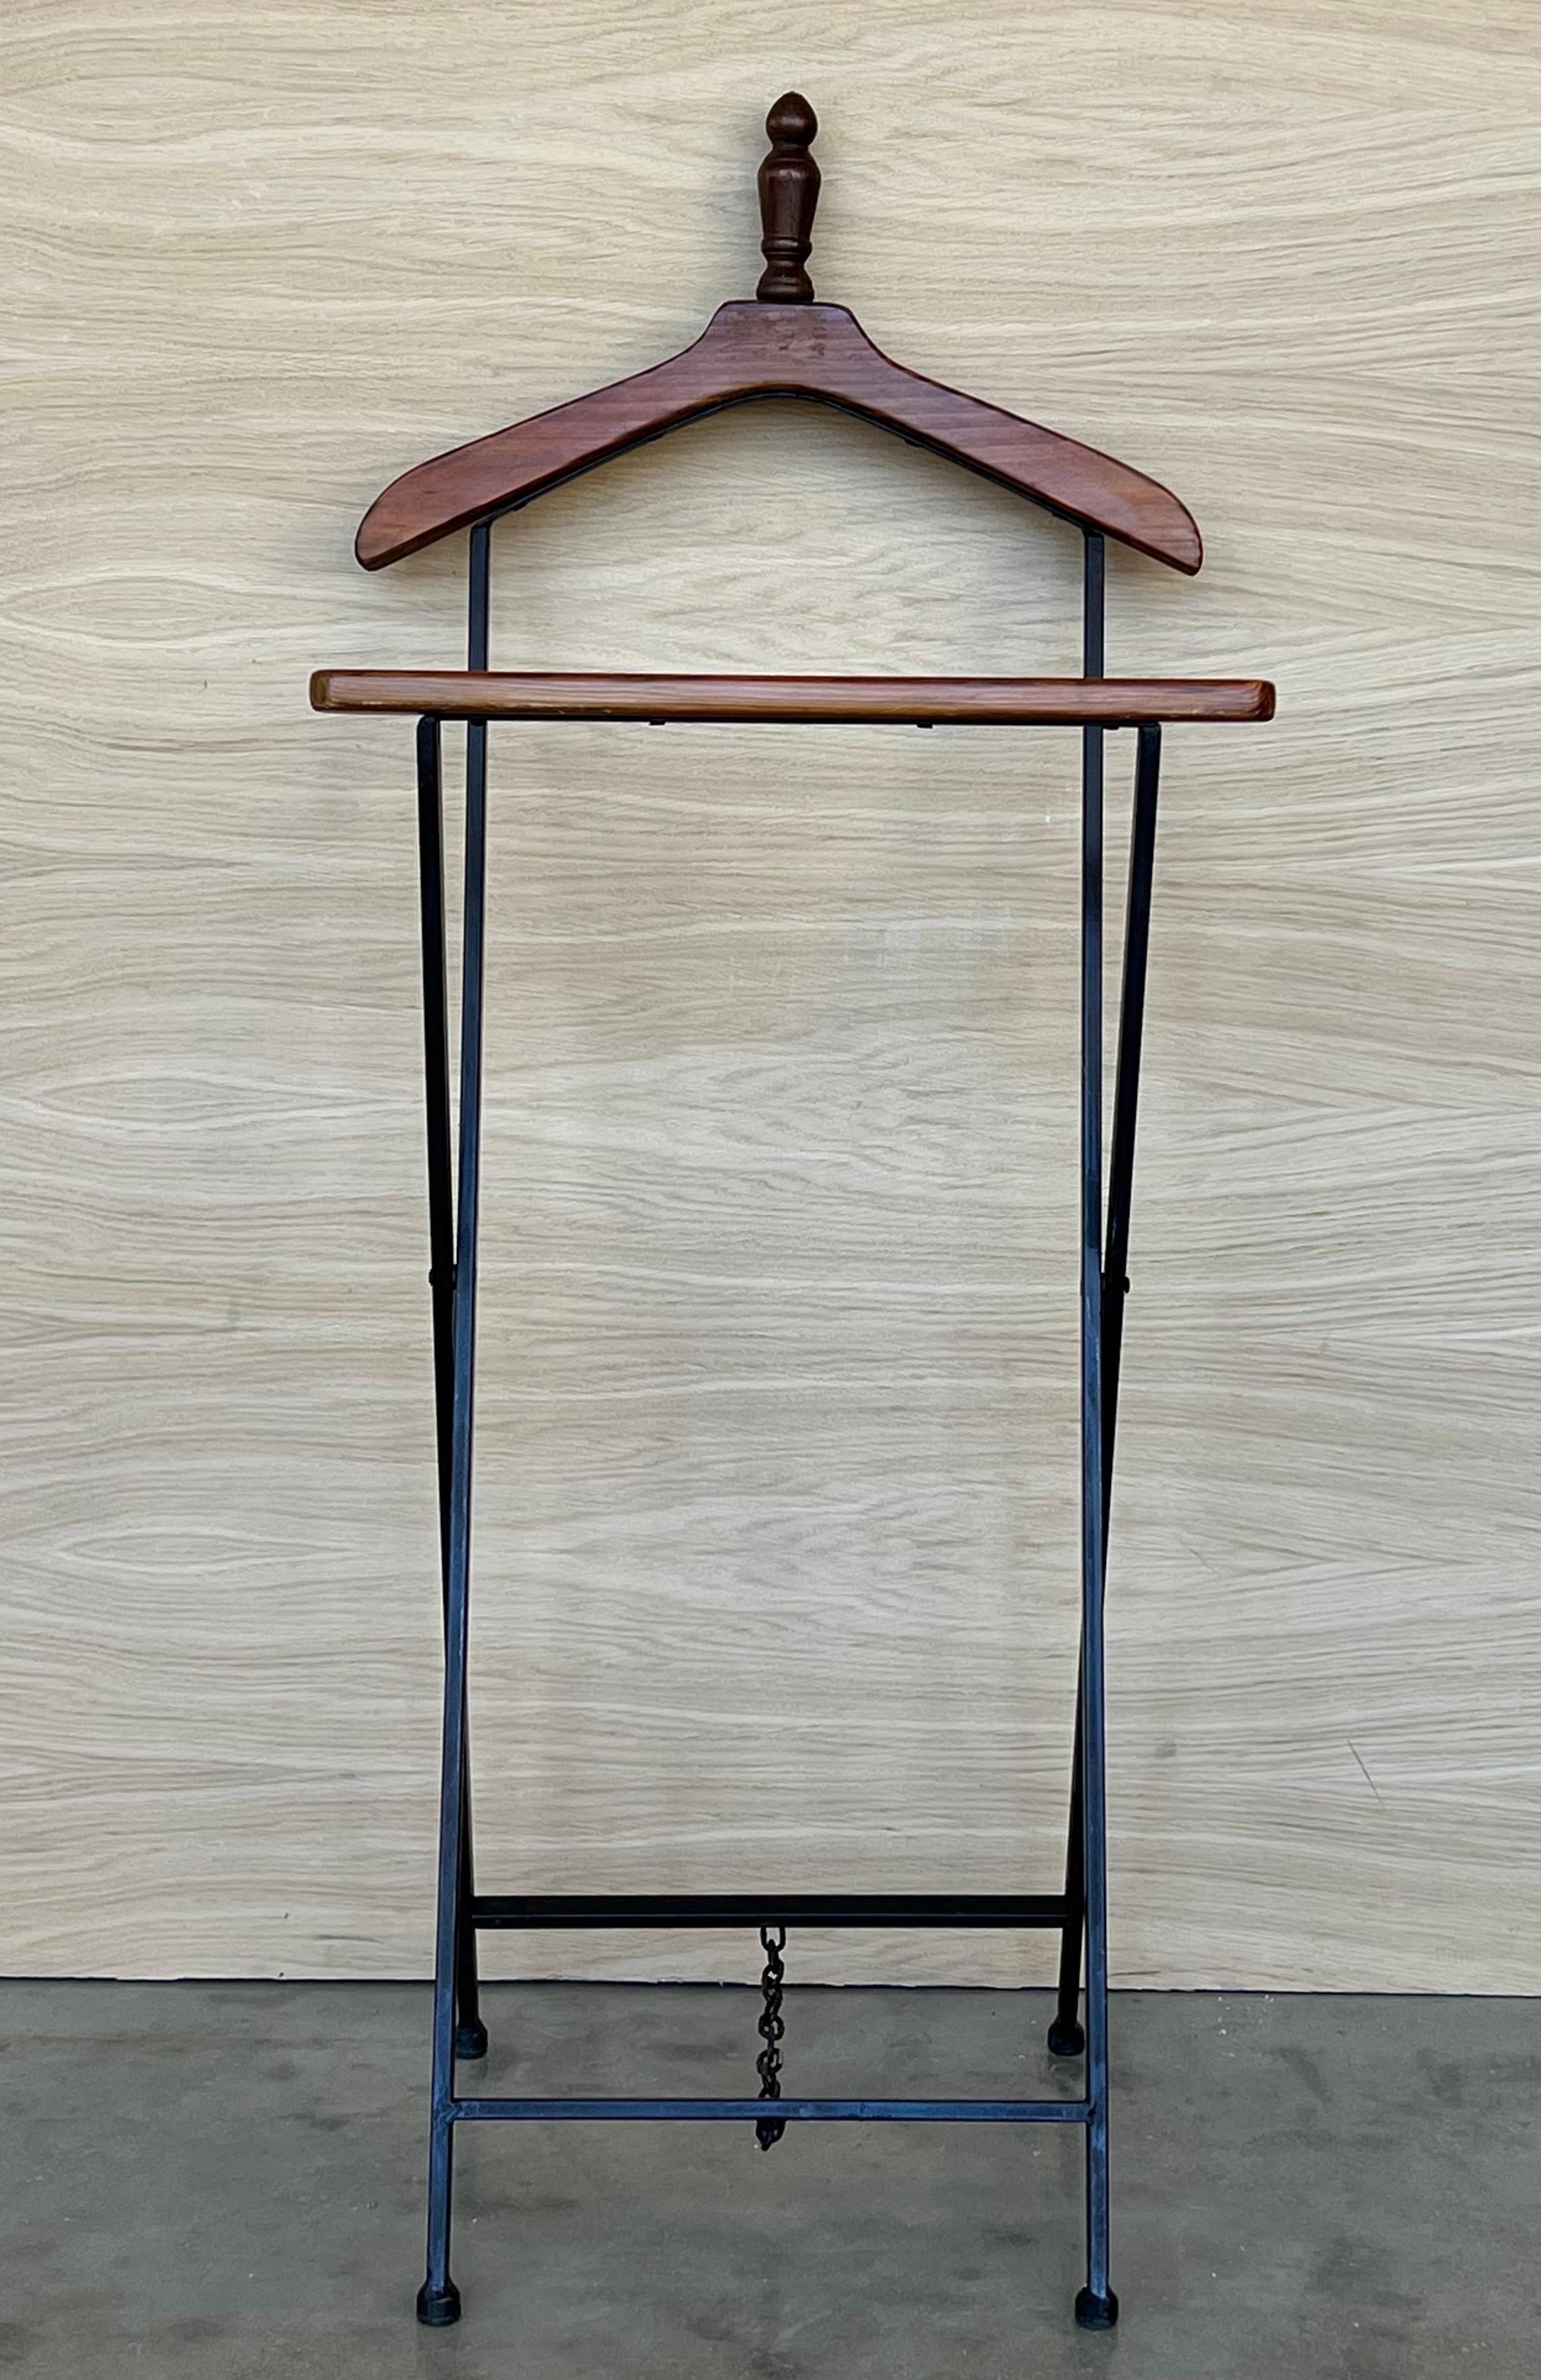 Ultra-rare mid-century beech wood and iron suit rack valet. This marvellous item was designed and produced during the 1960s in Italy. This extremely rare hanger is made of beech wood with black lacquered uprights .
A marvellous piece that will